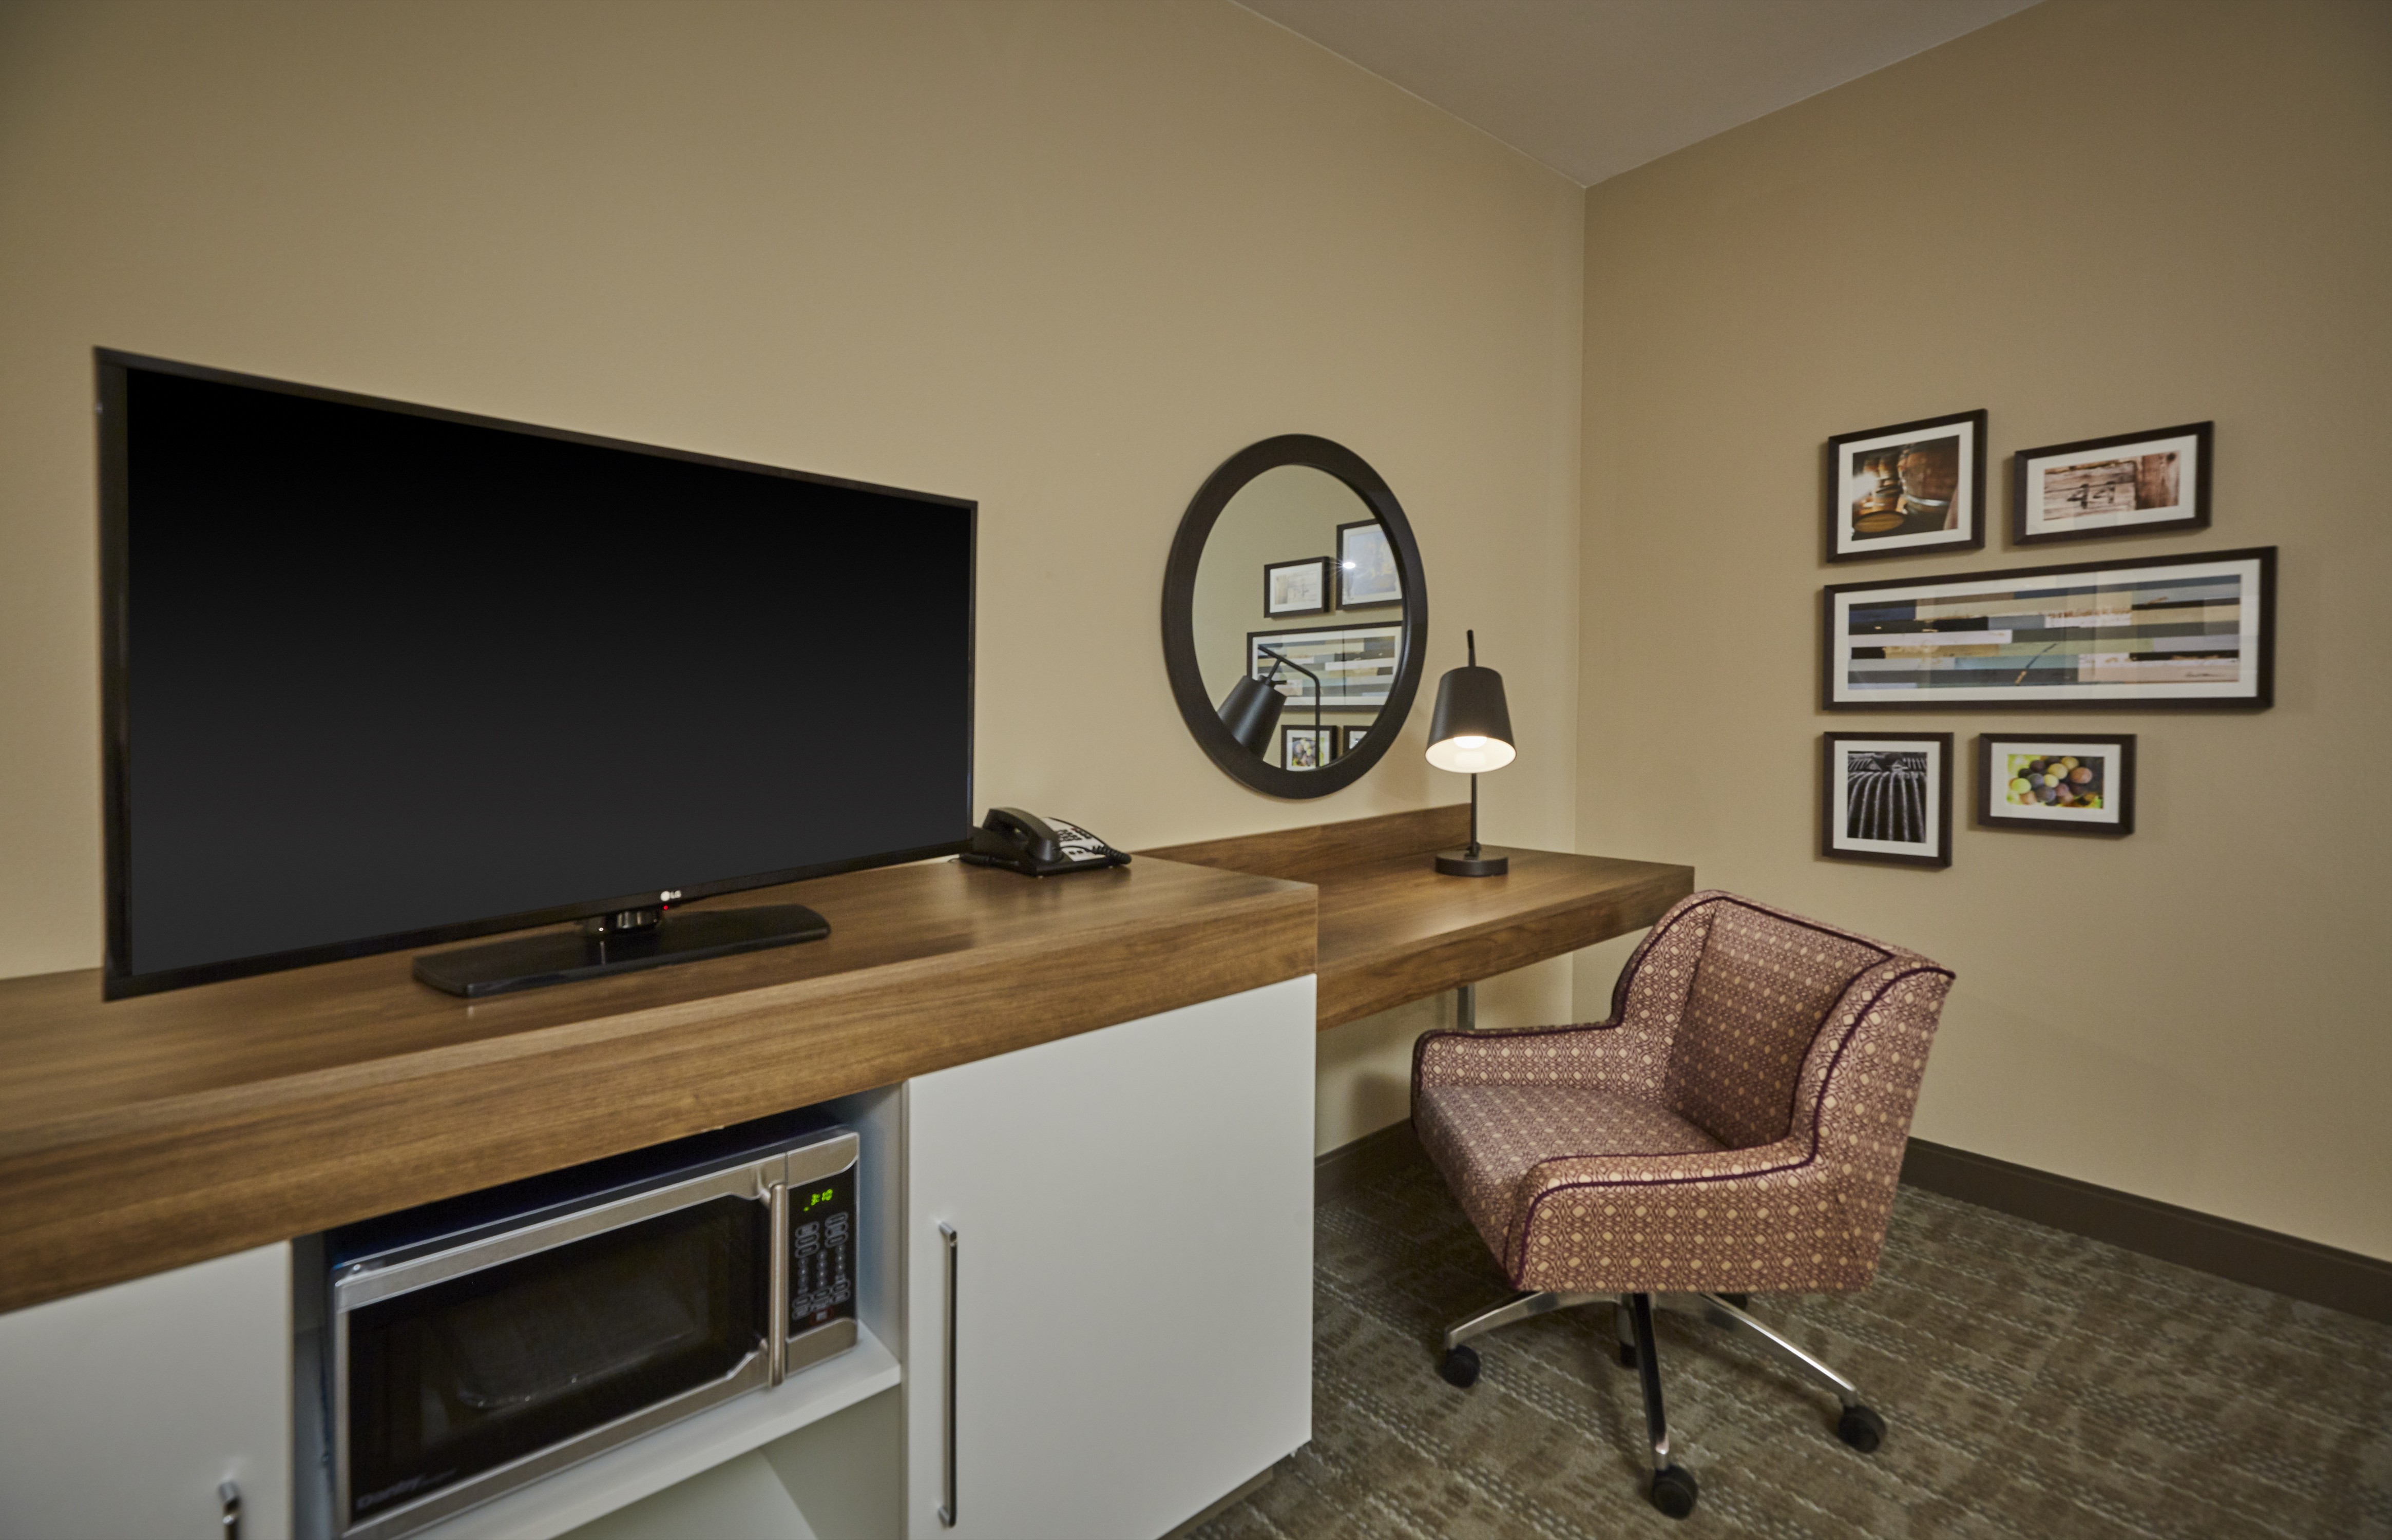 TV, Microwave and Work Desk Area of Guest Room